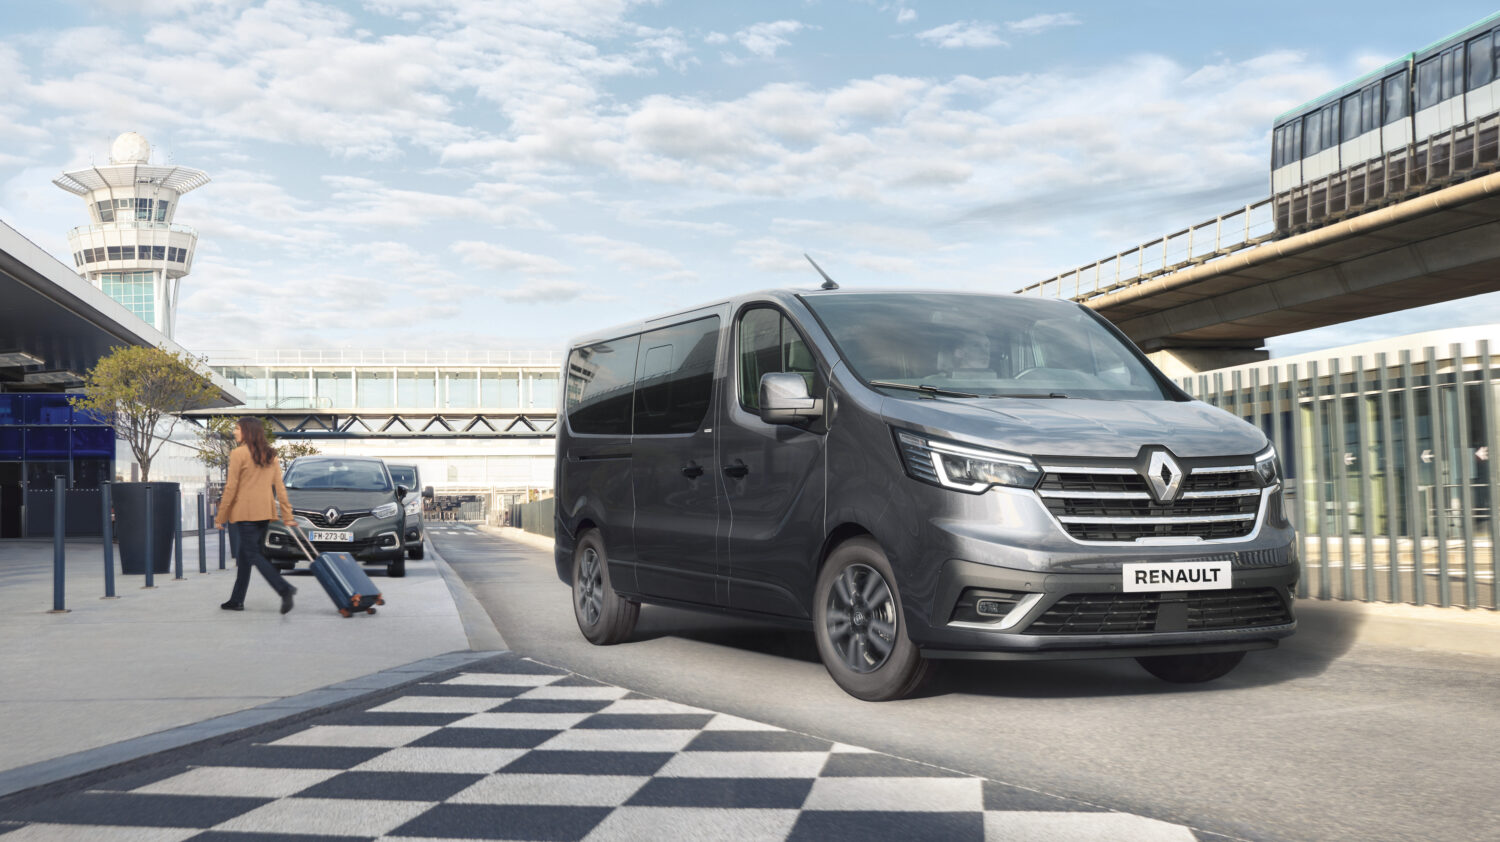 2020 - New Renault Trafic SpaceClass